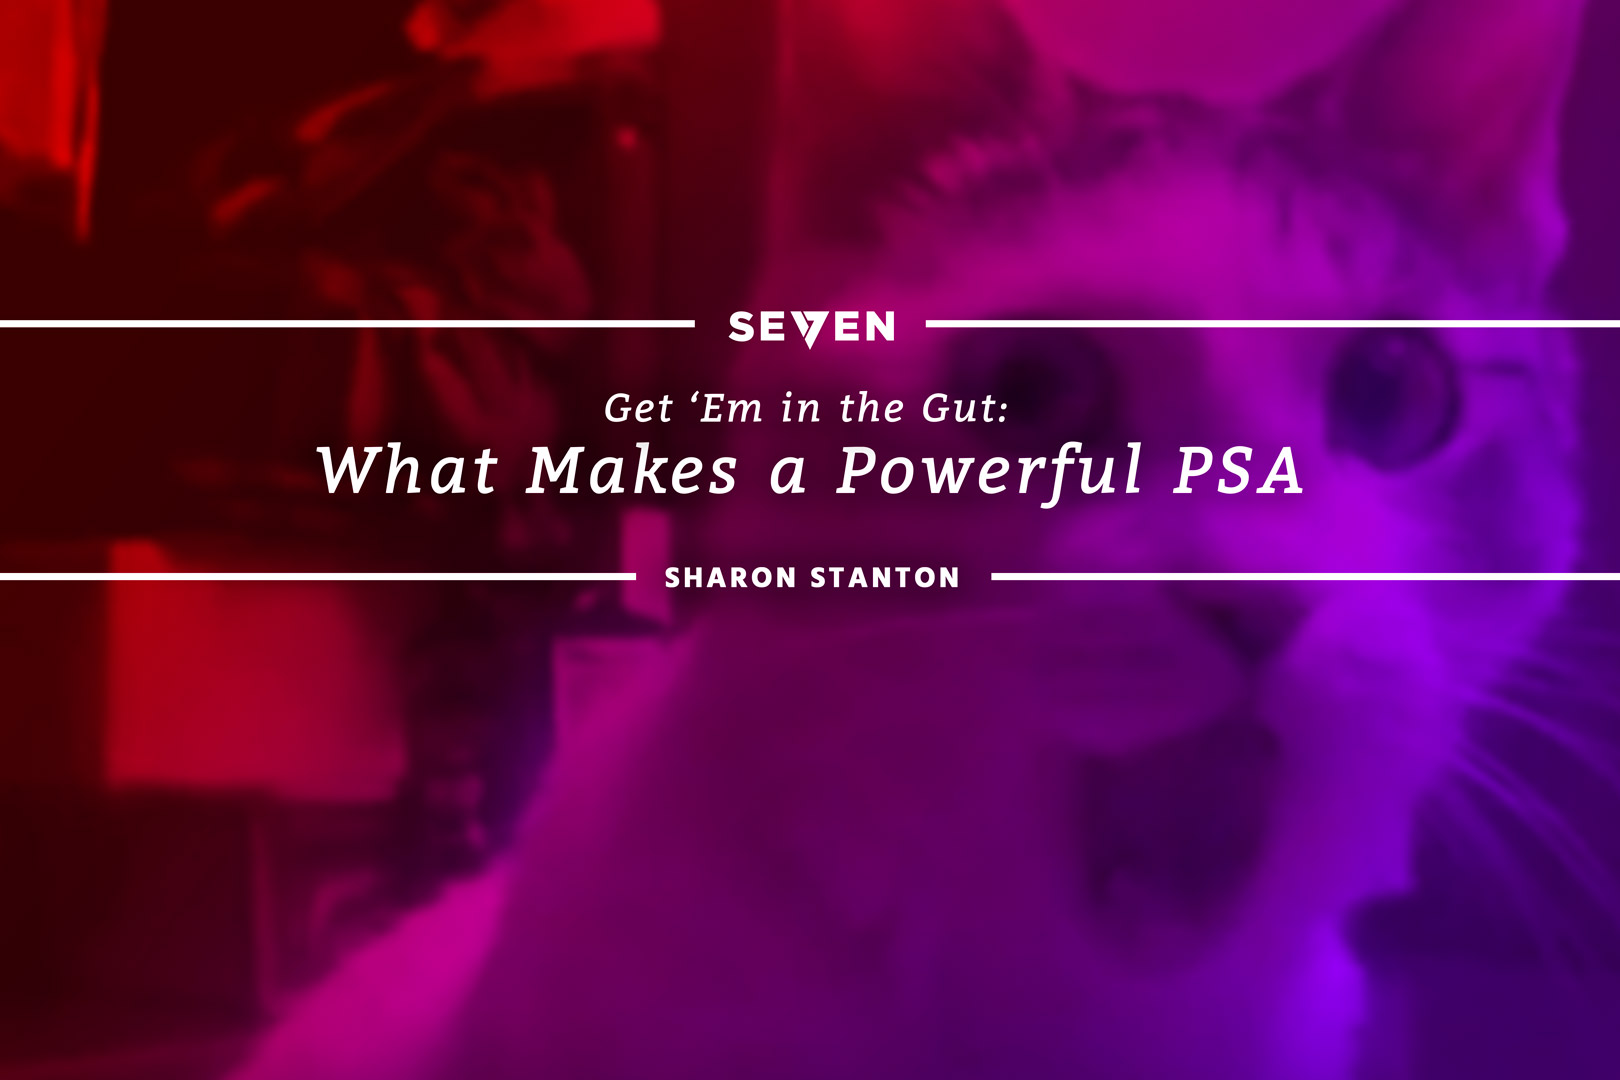 Get ‘Em in the Gut: What Makes a Powerful PSA